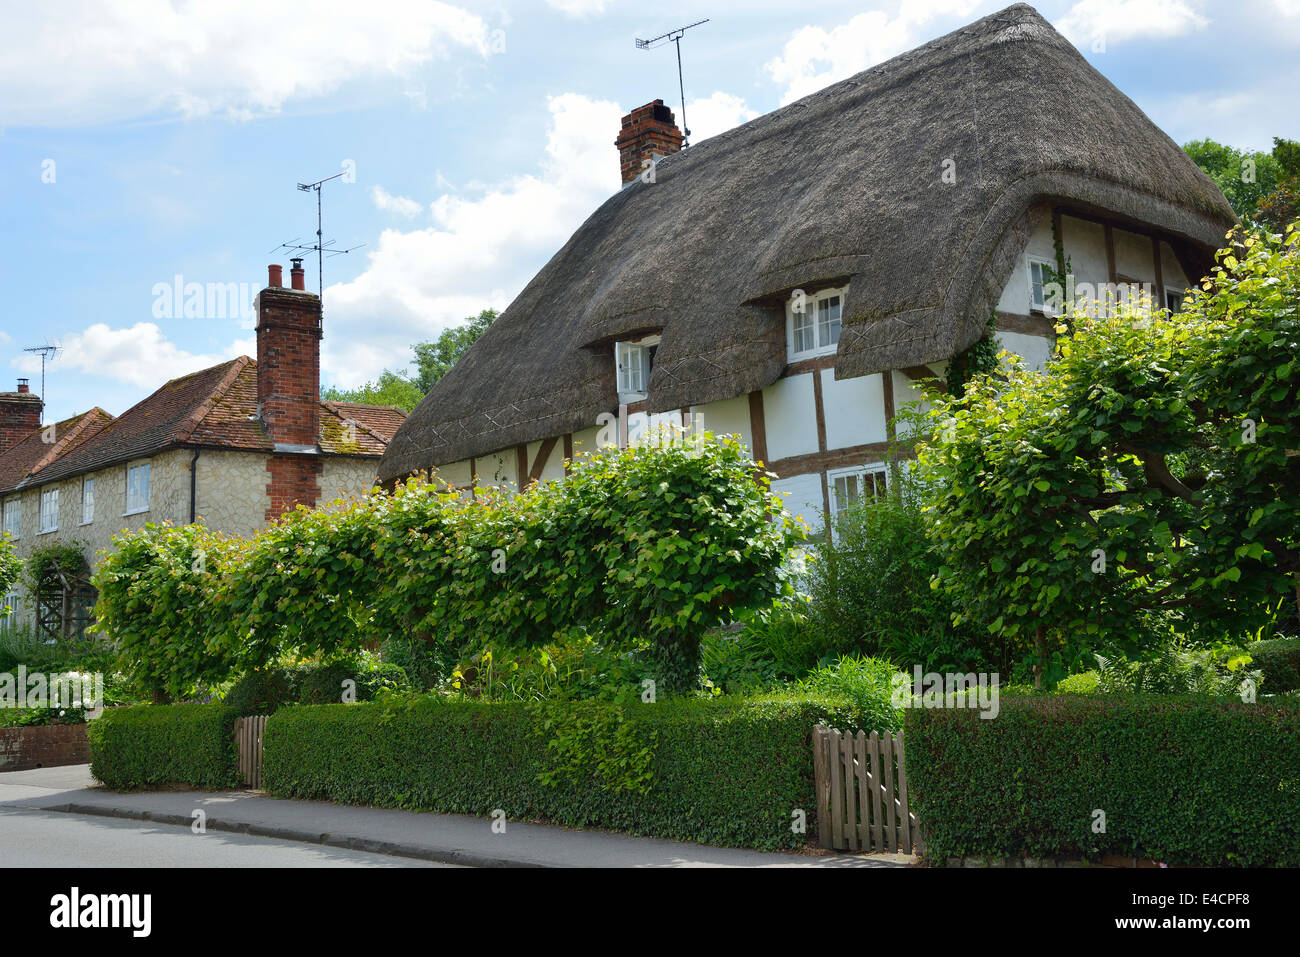 Thatched black and white country cottage in the village of  Selborne, Hampshire, England, UK Stock Photo